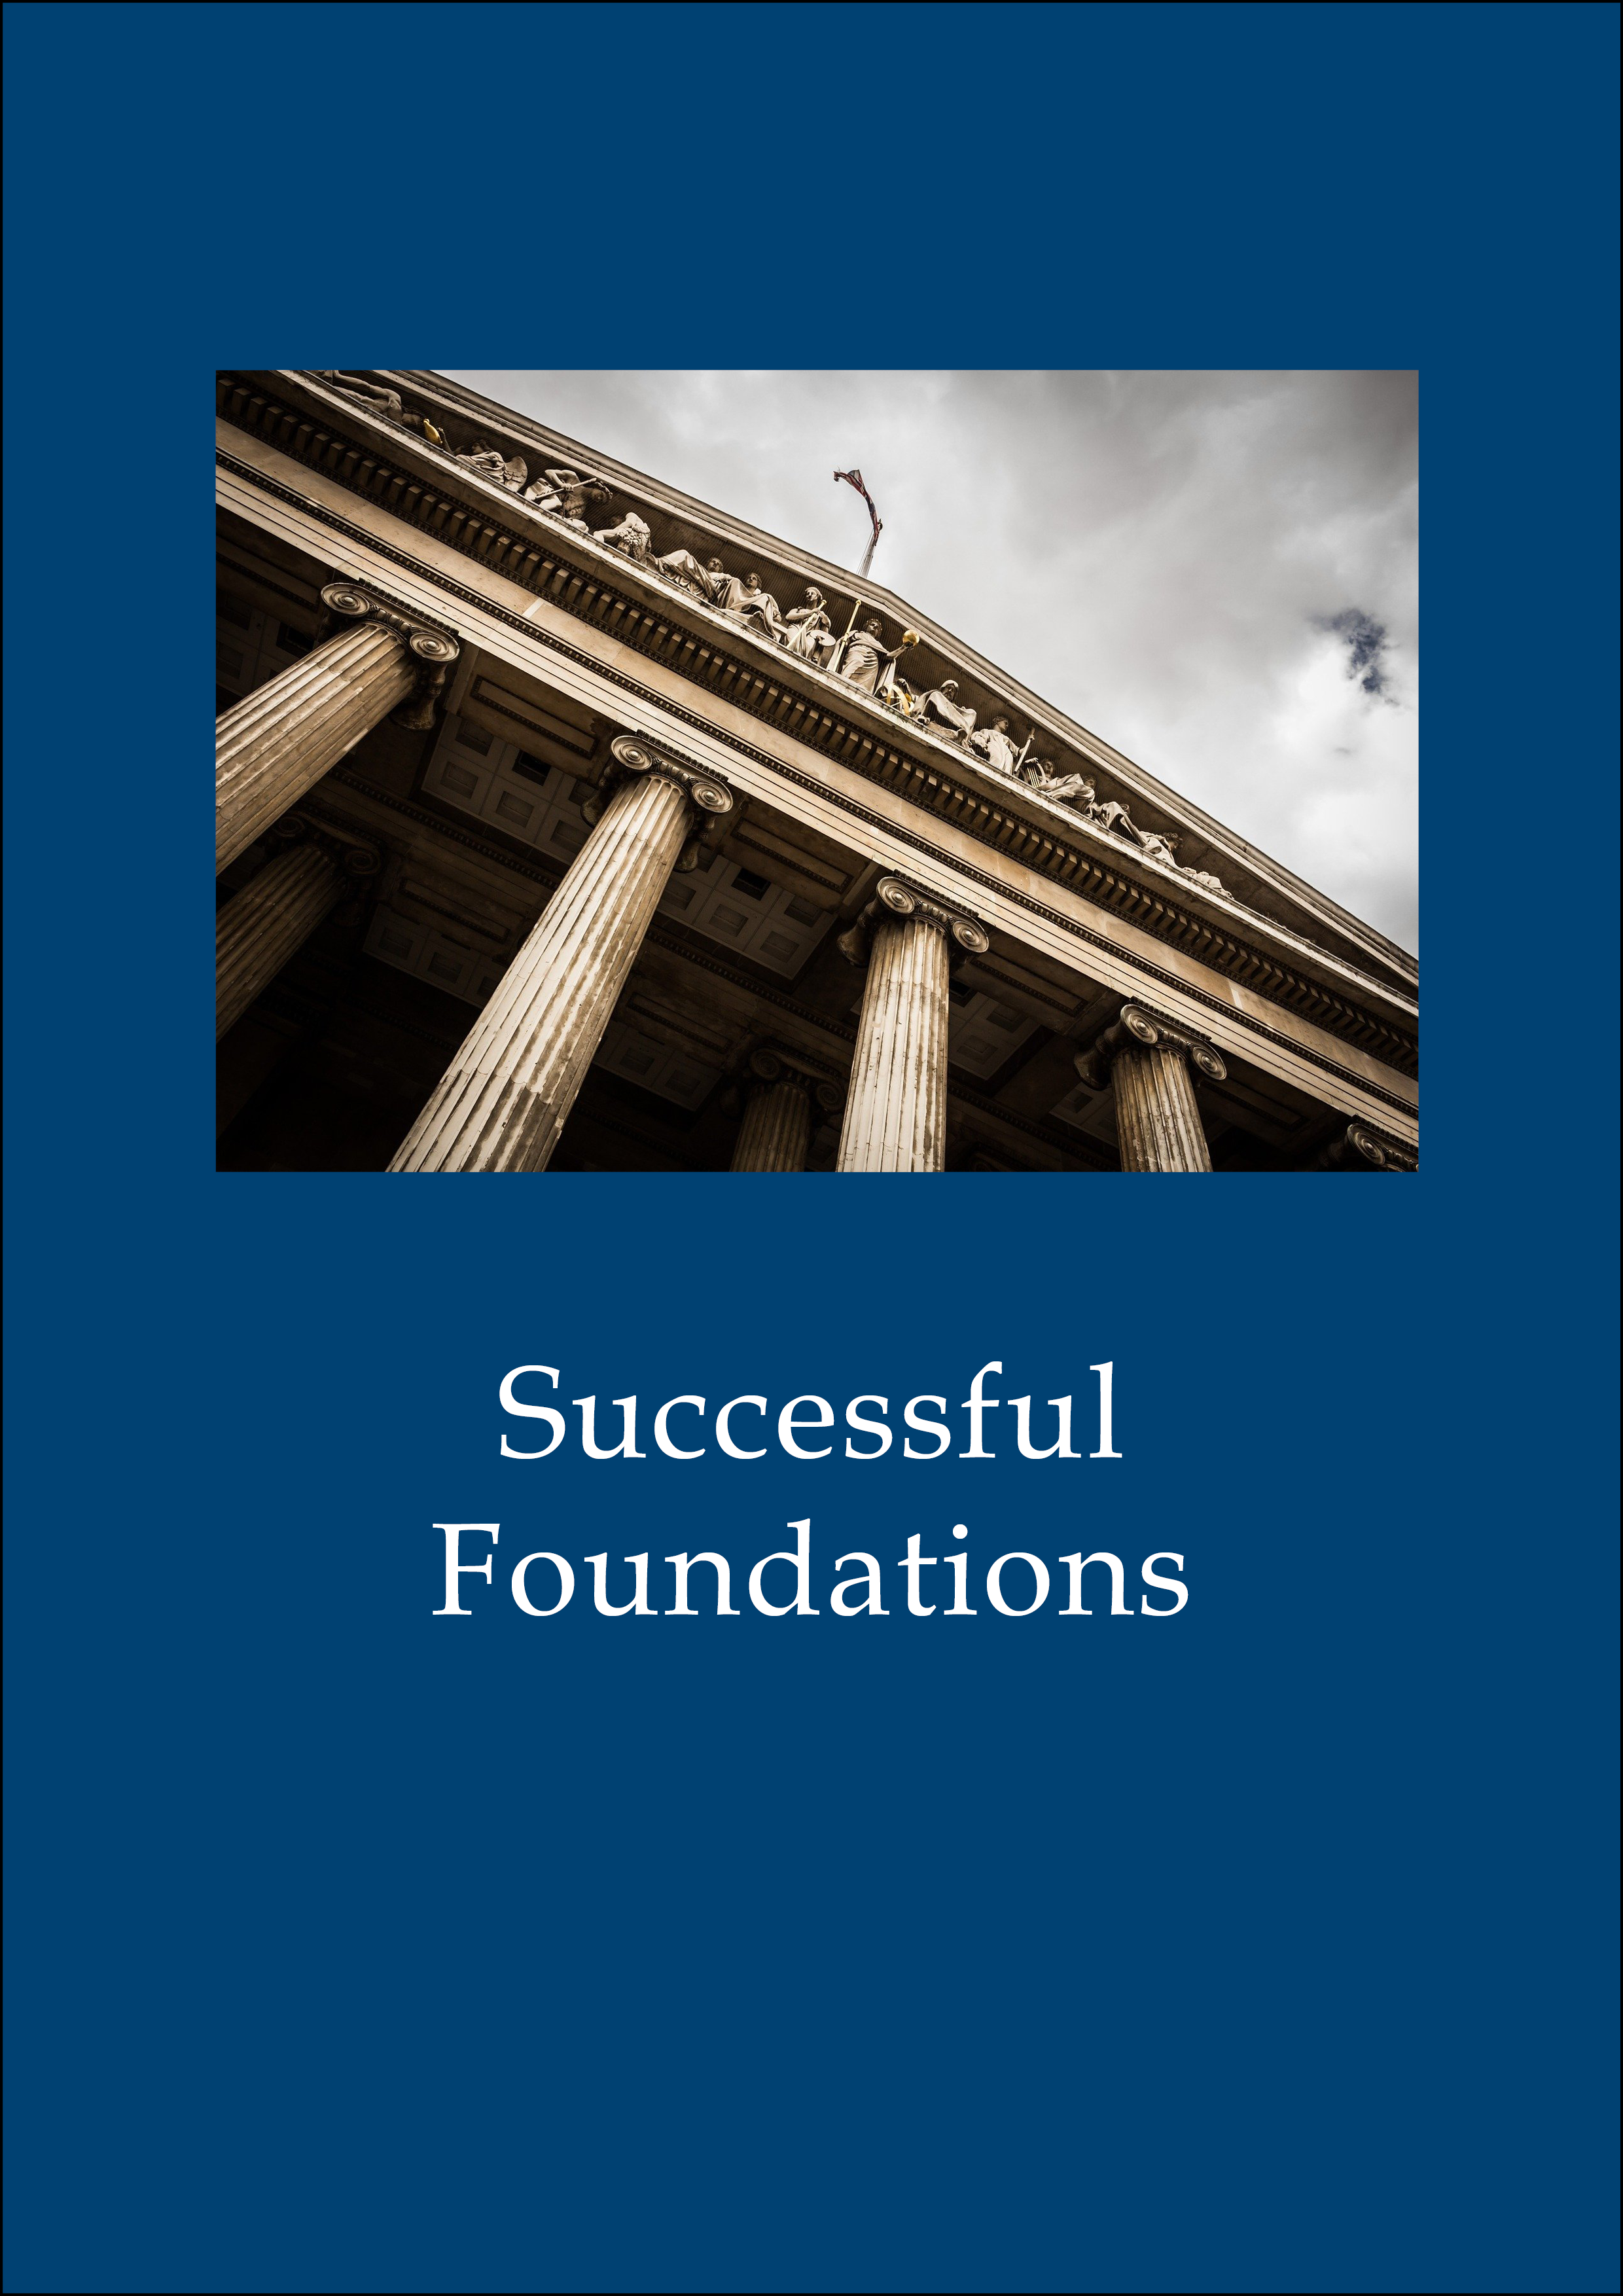 Old building with chapter title successful Foundations